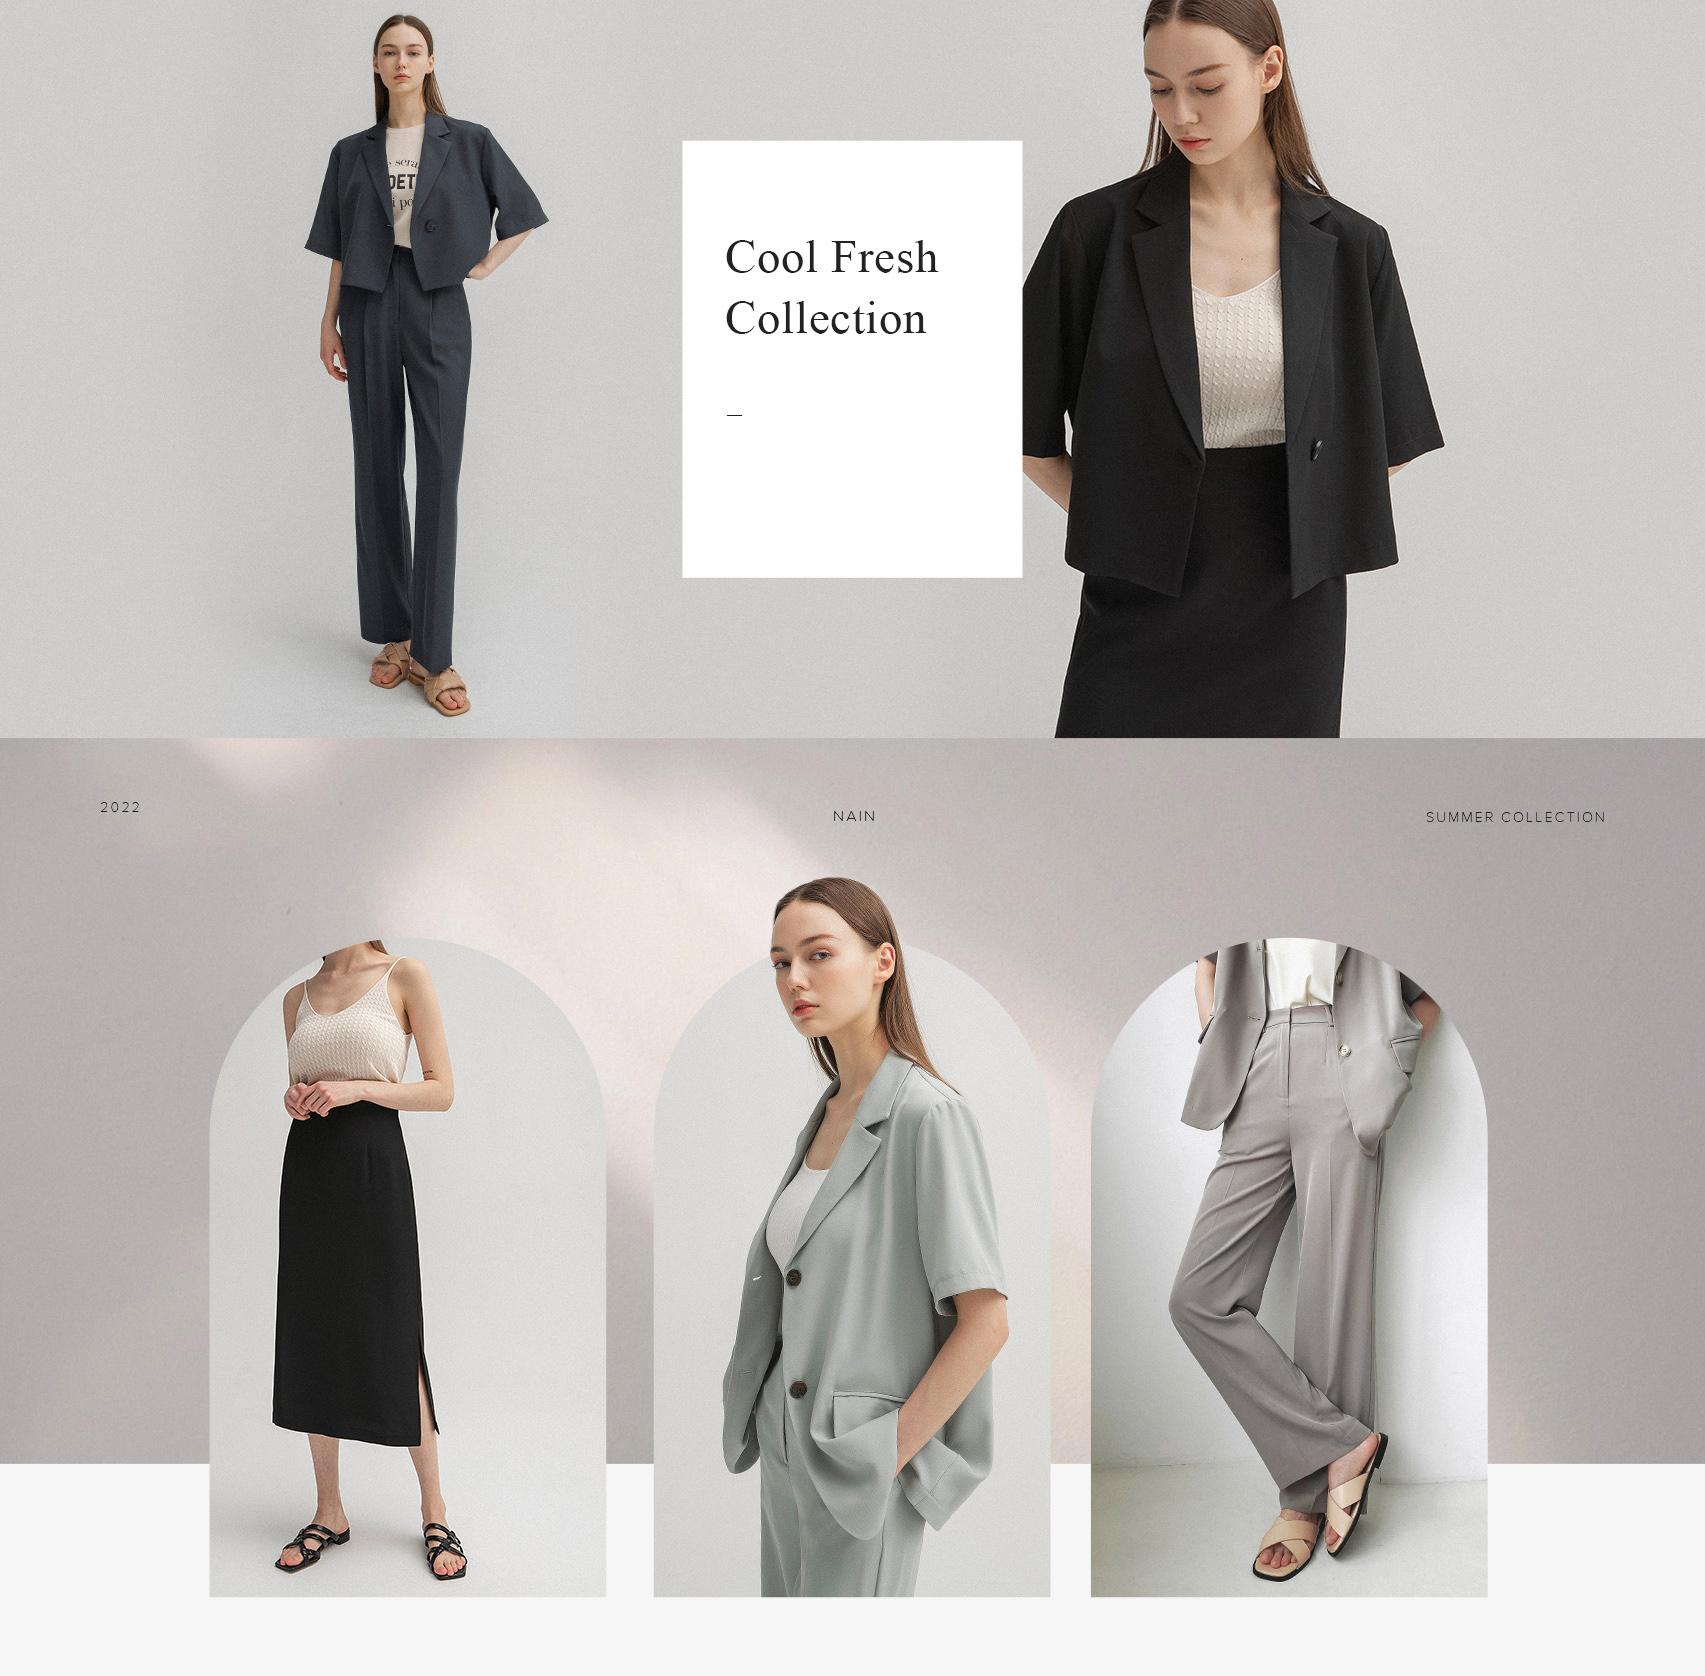 Cool Fresh fashion collection from NAIN